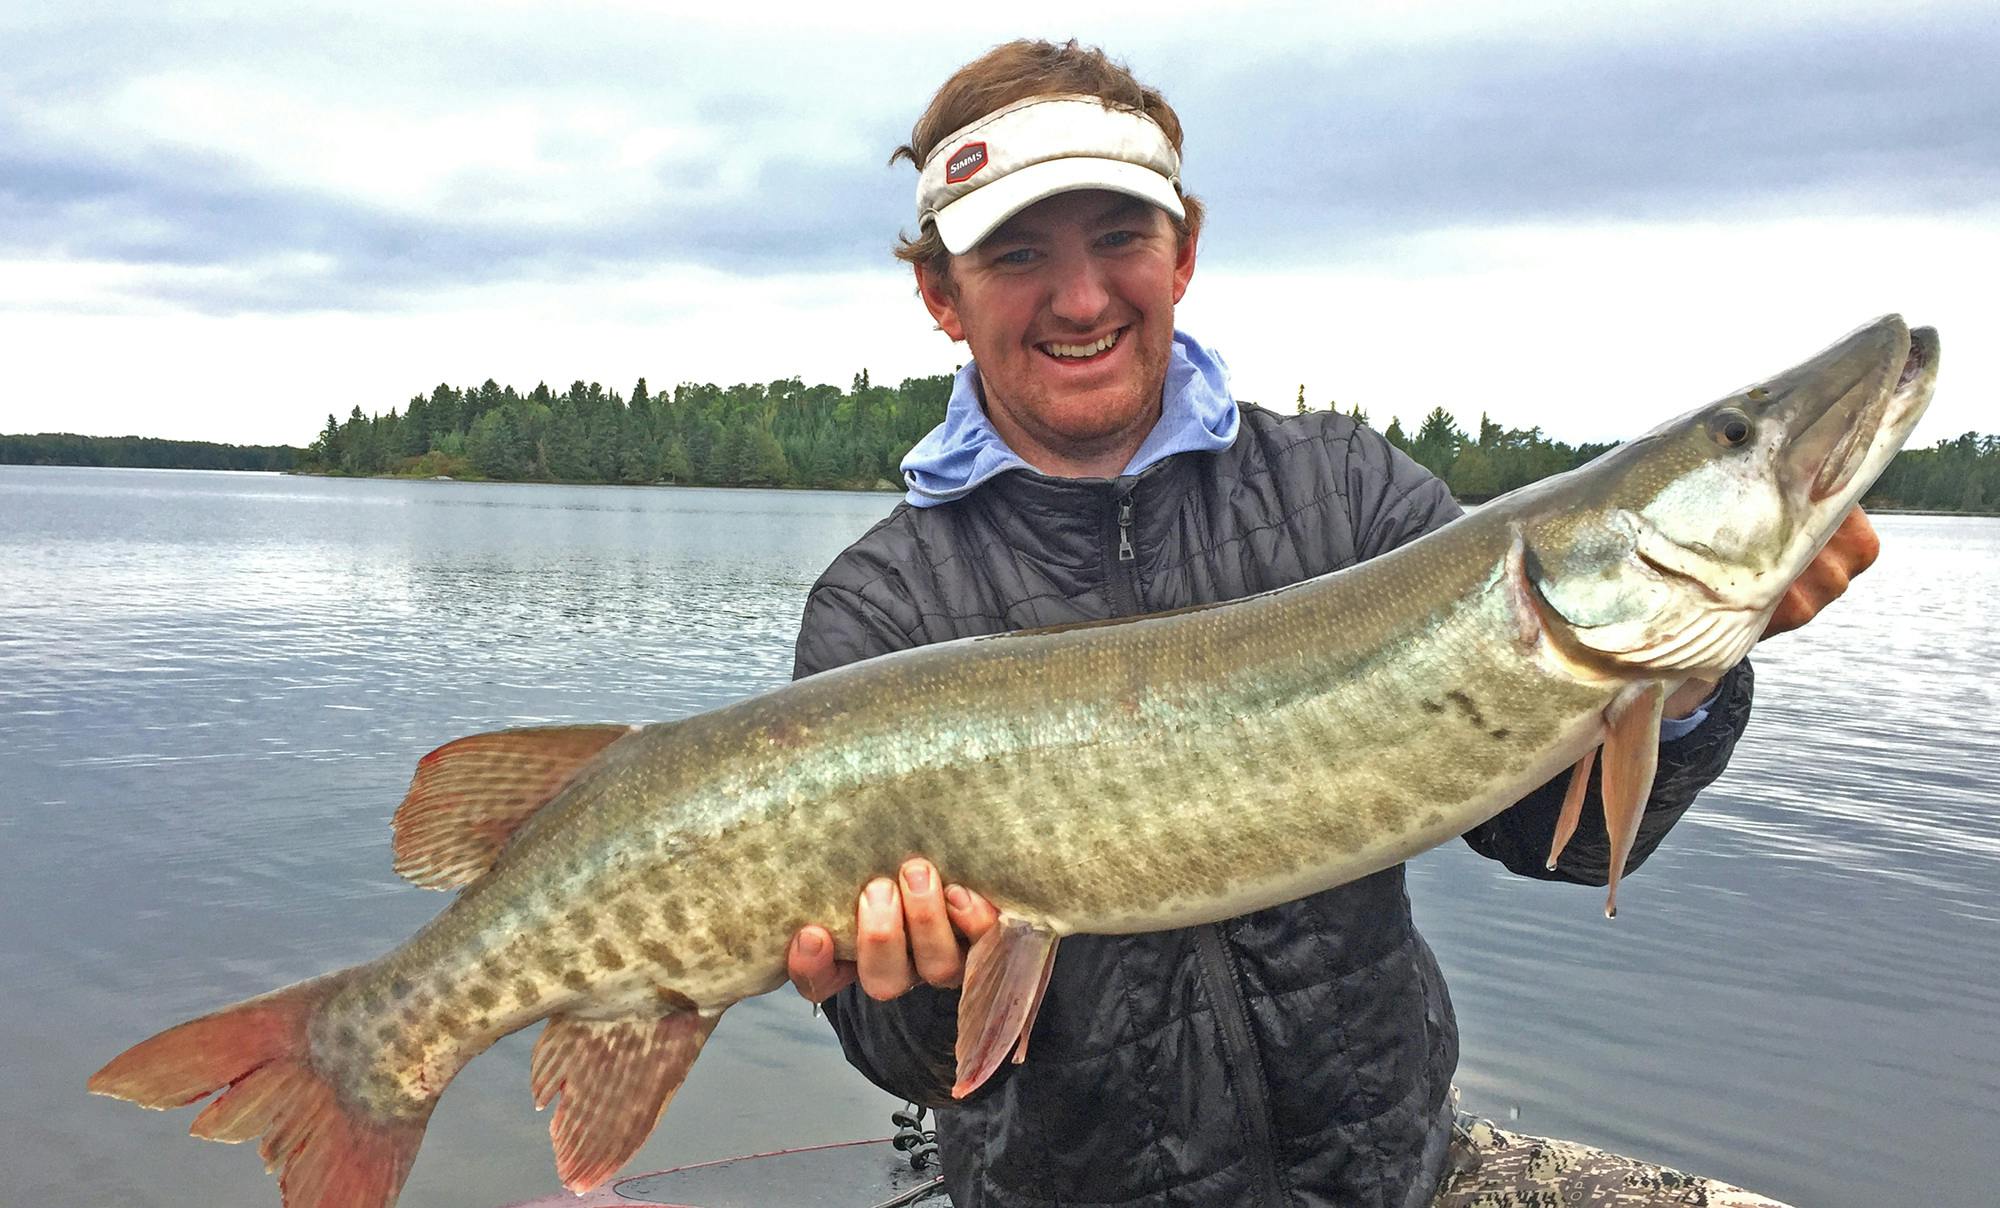 Lake of the Woods, Ontario brings out the best in muskie fishing